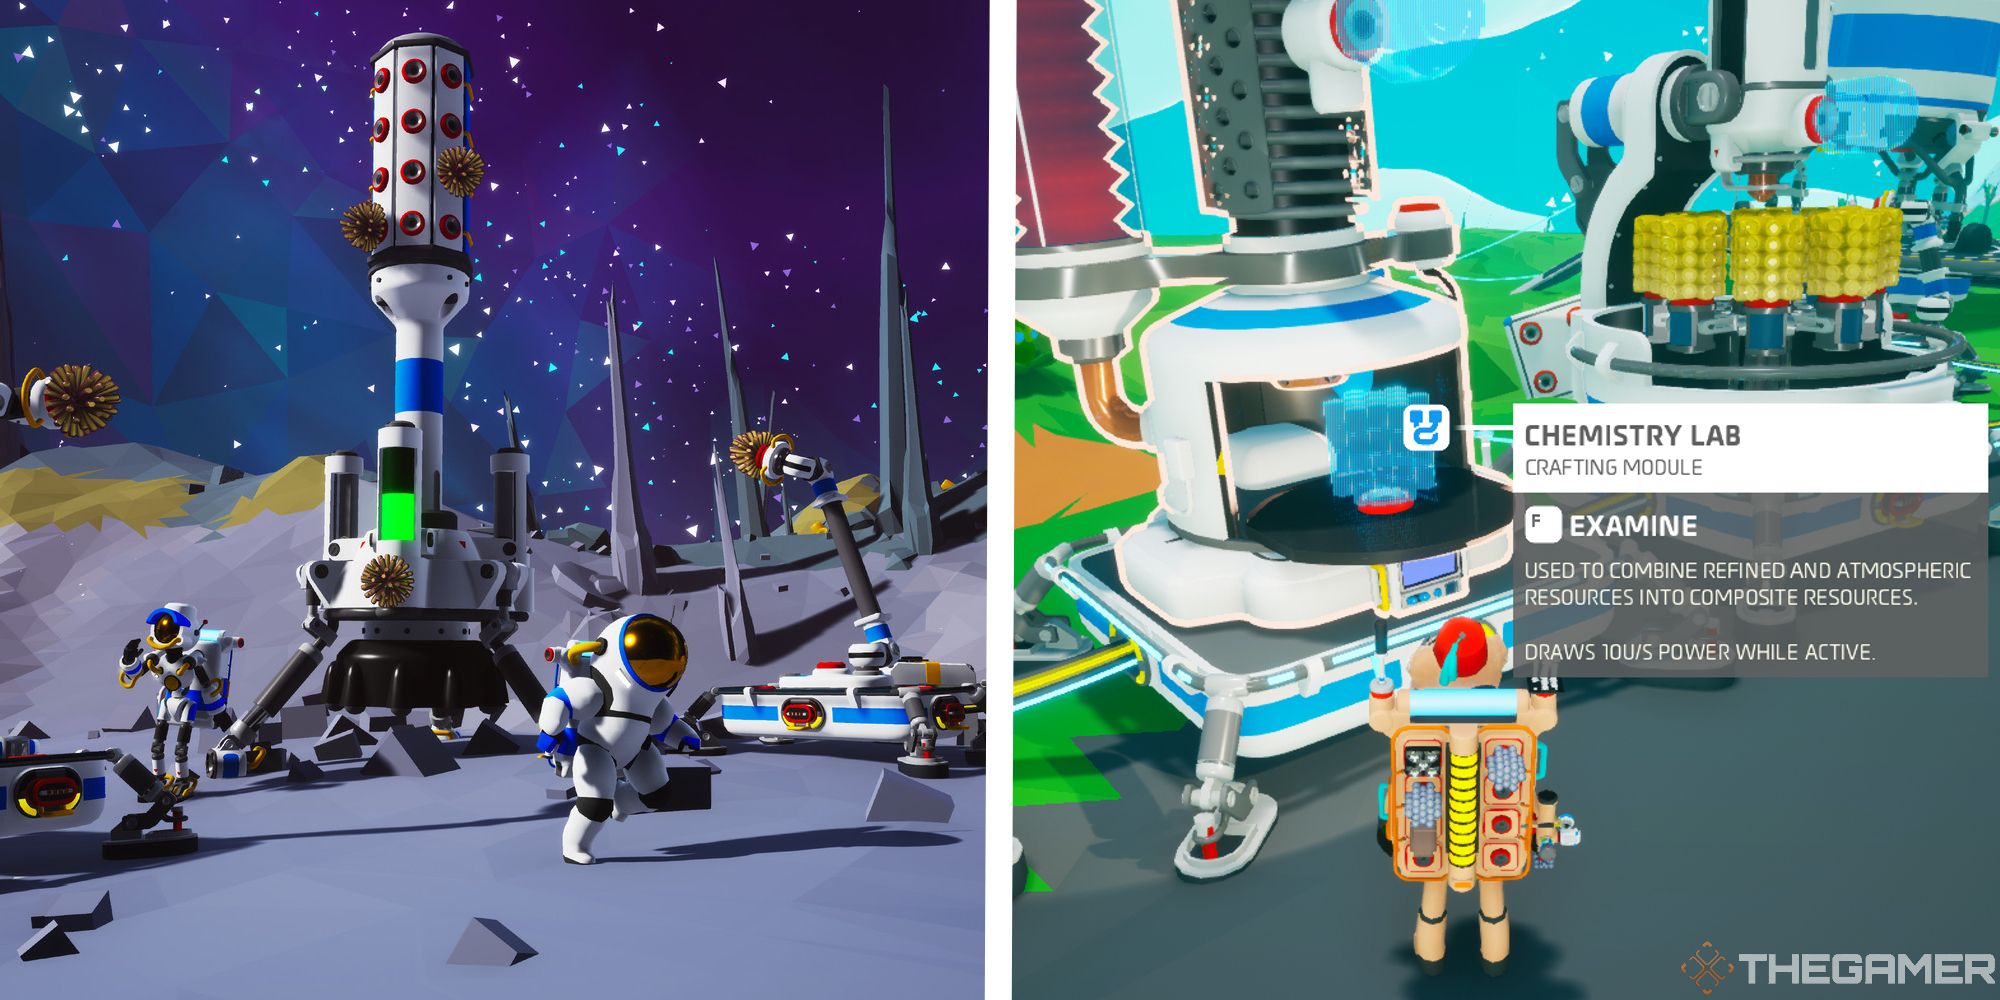 promotional image of astroneer next to image of player standing at chemistry lab